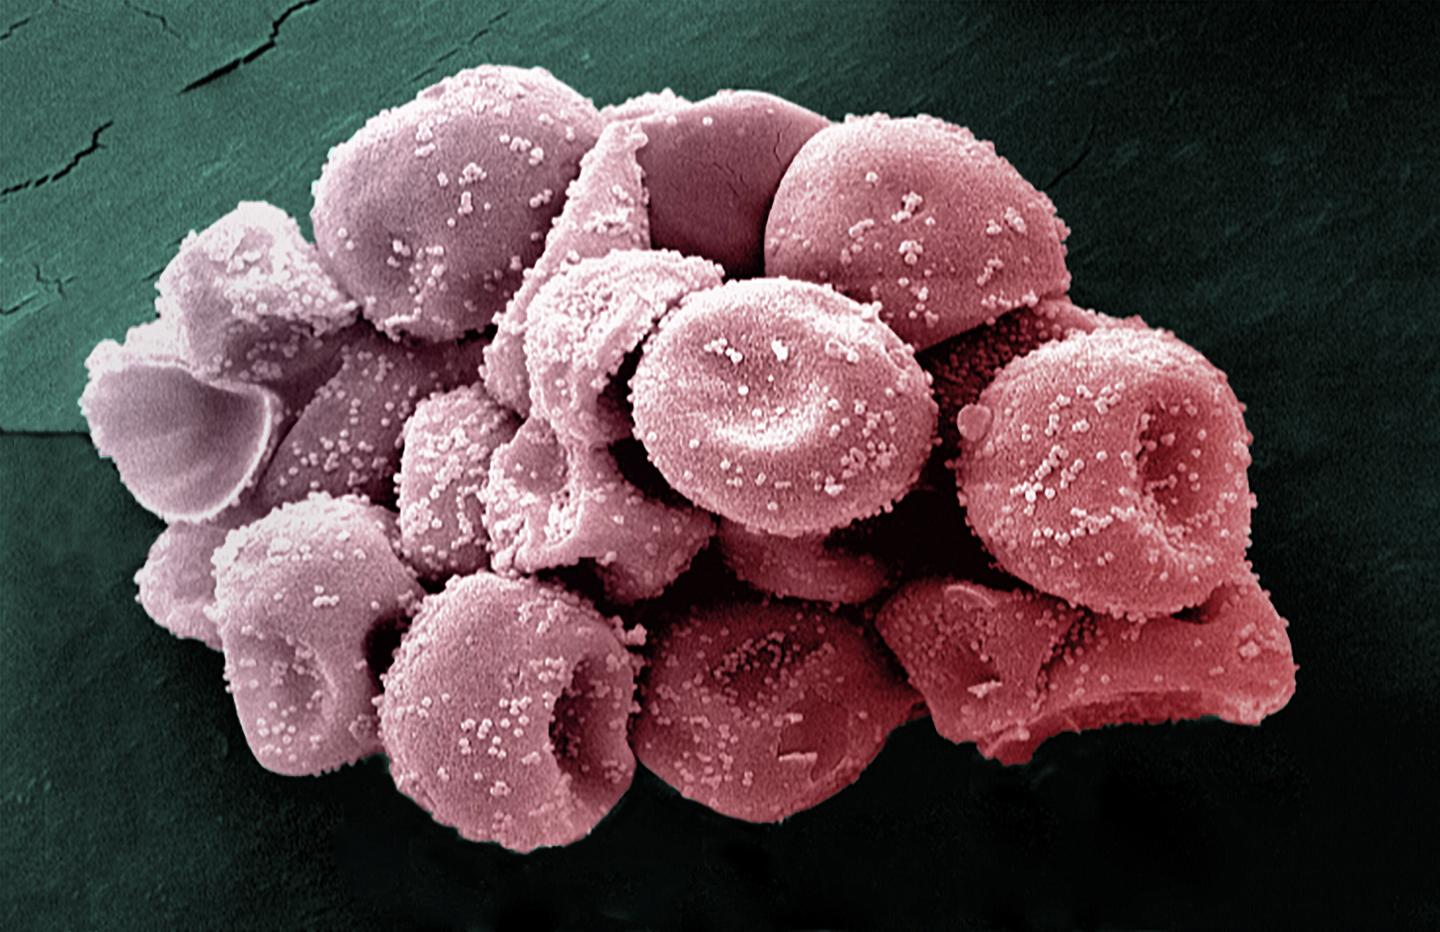 Cypress Pollen Grains Observed in Scanning Electron Microscopy (2200X)